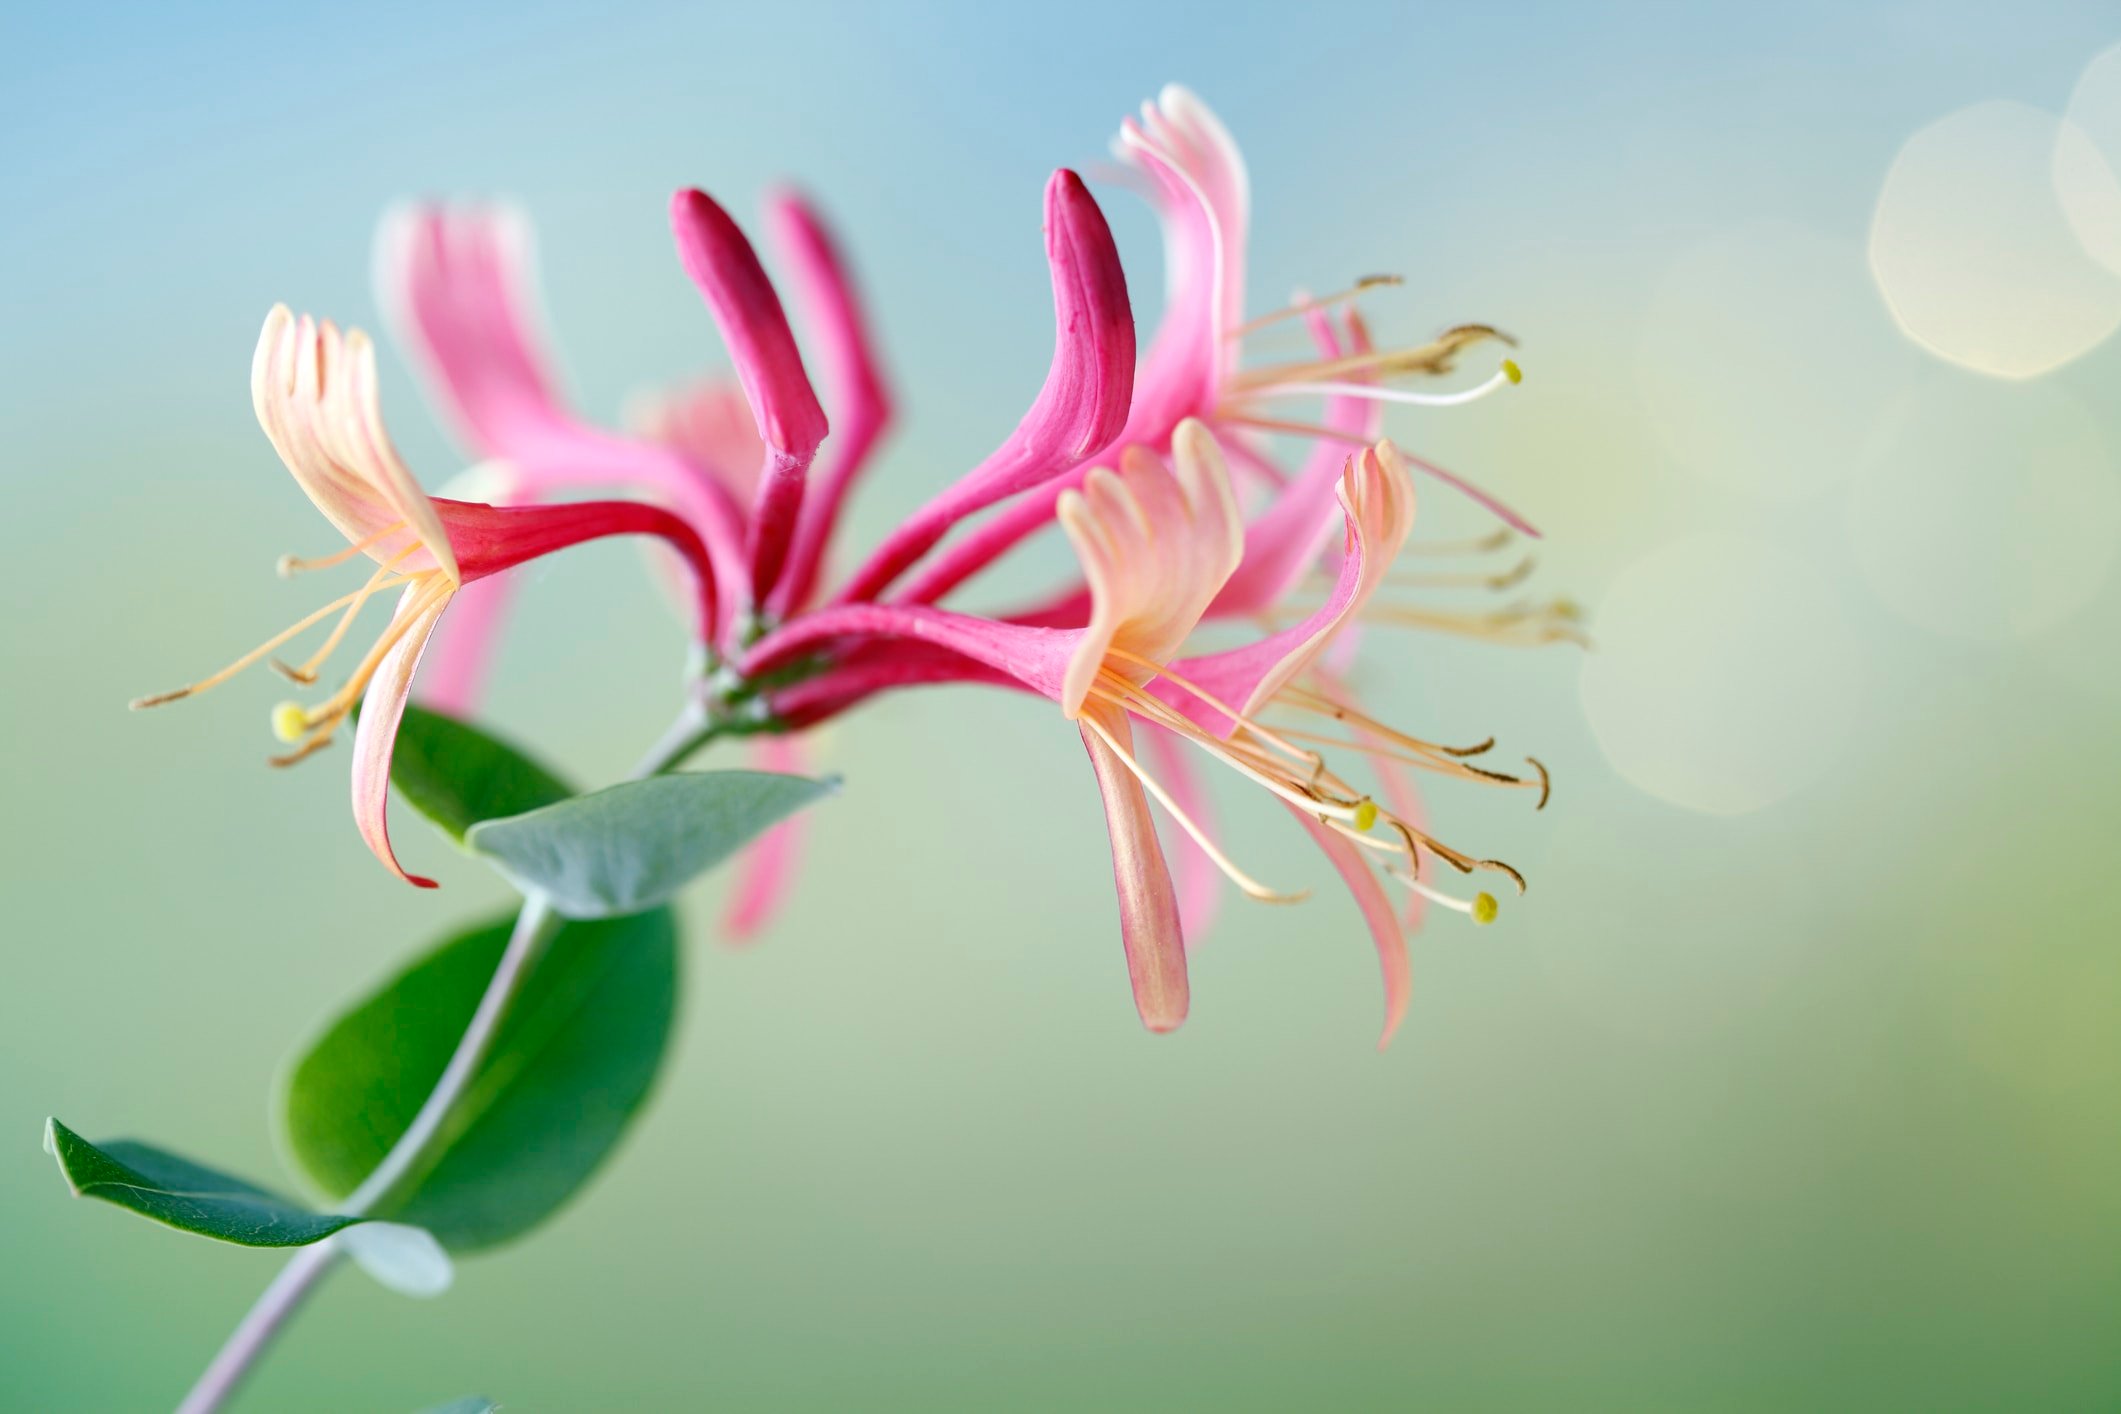 "Close-up of a flower of Honeysuckle,also known as Woodbine /Lonicera Periclymenum/"